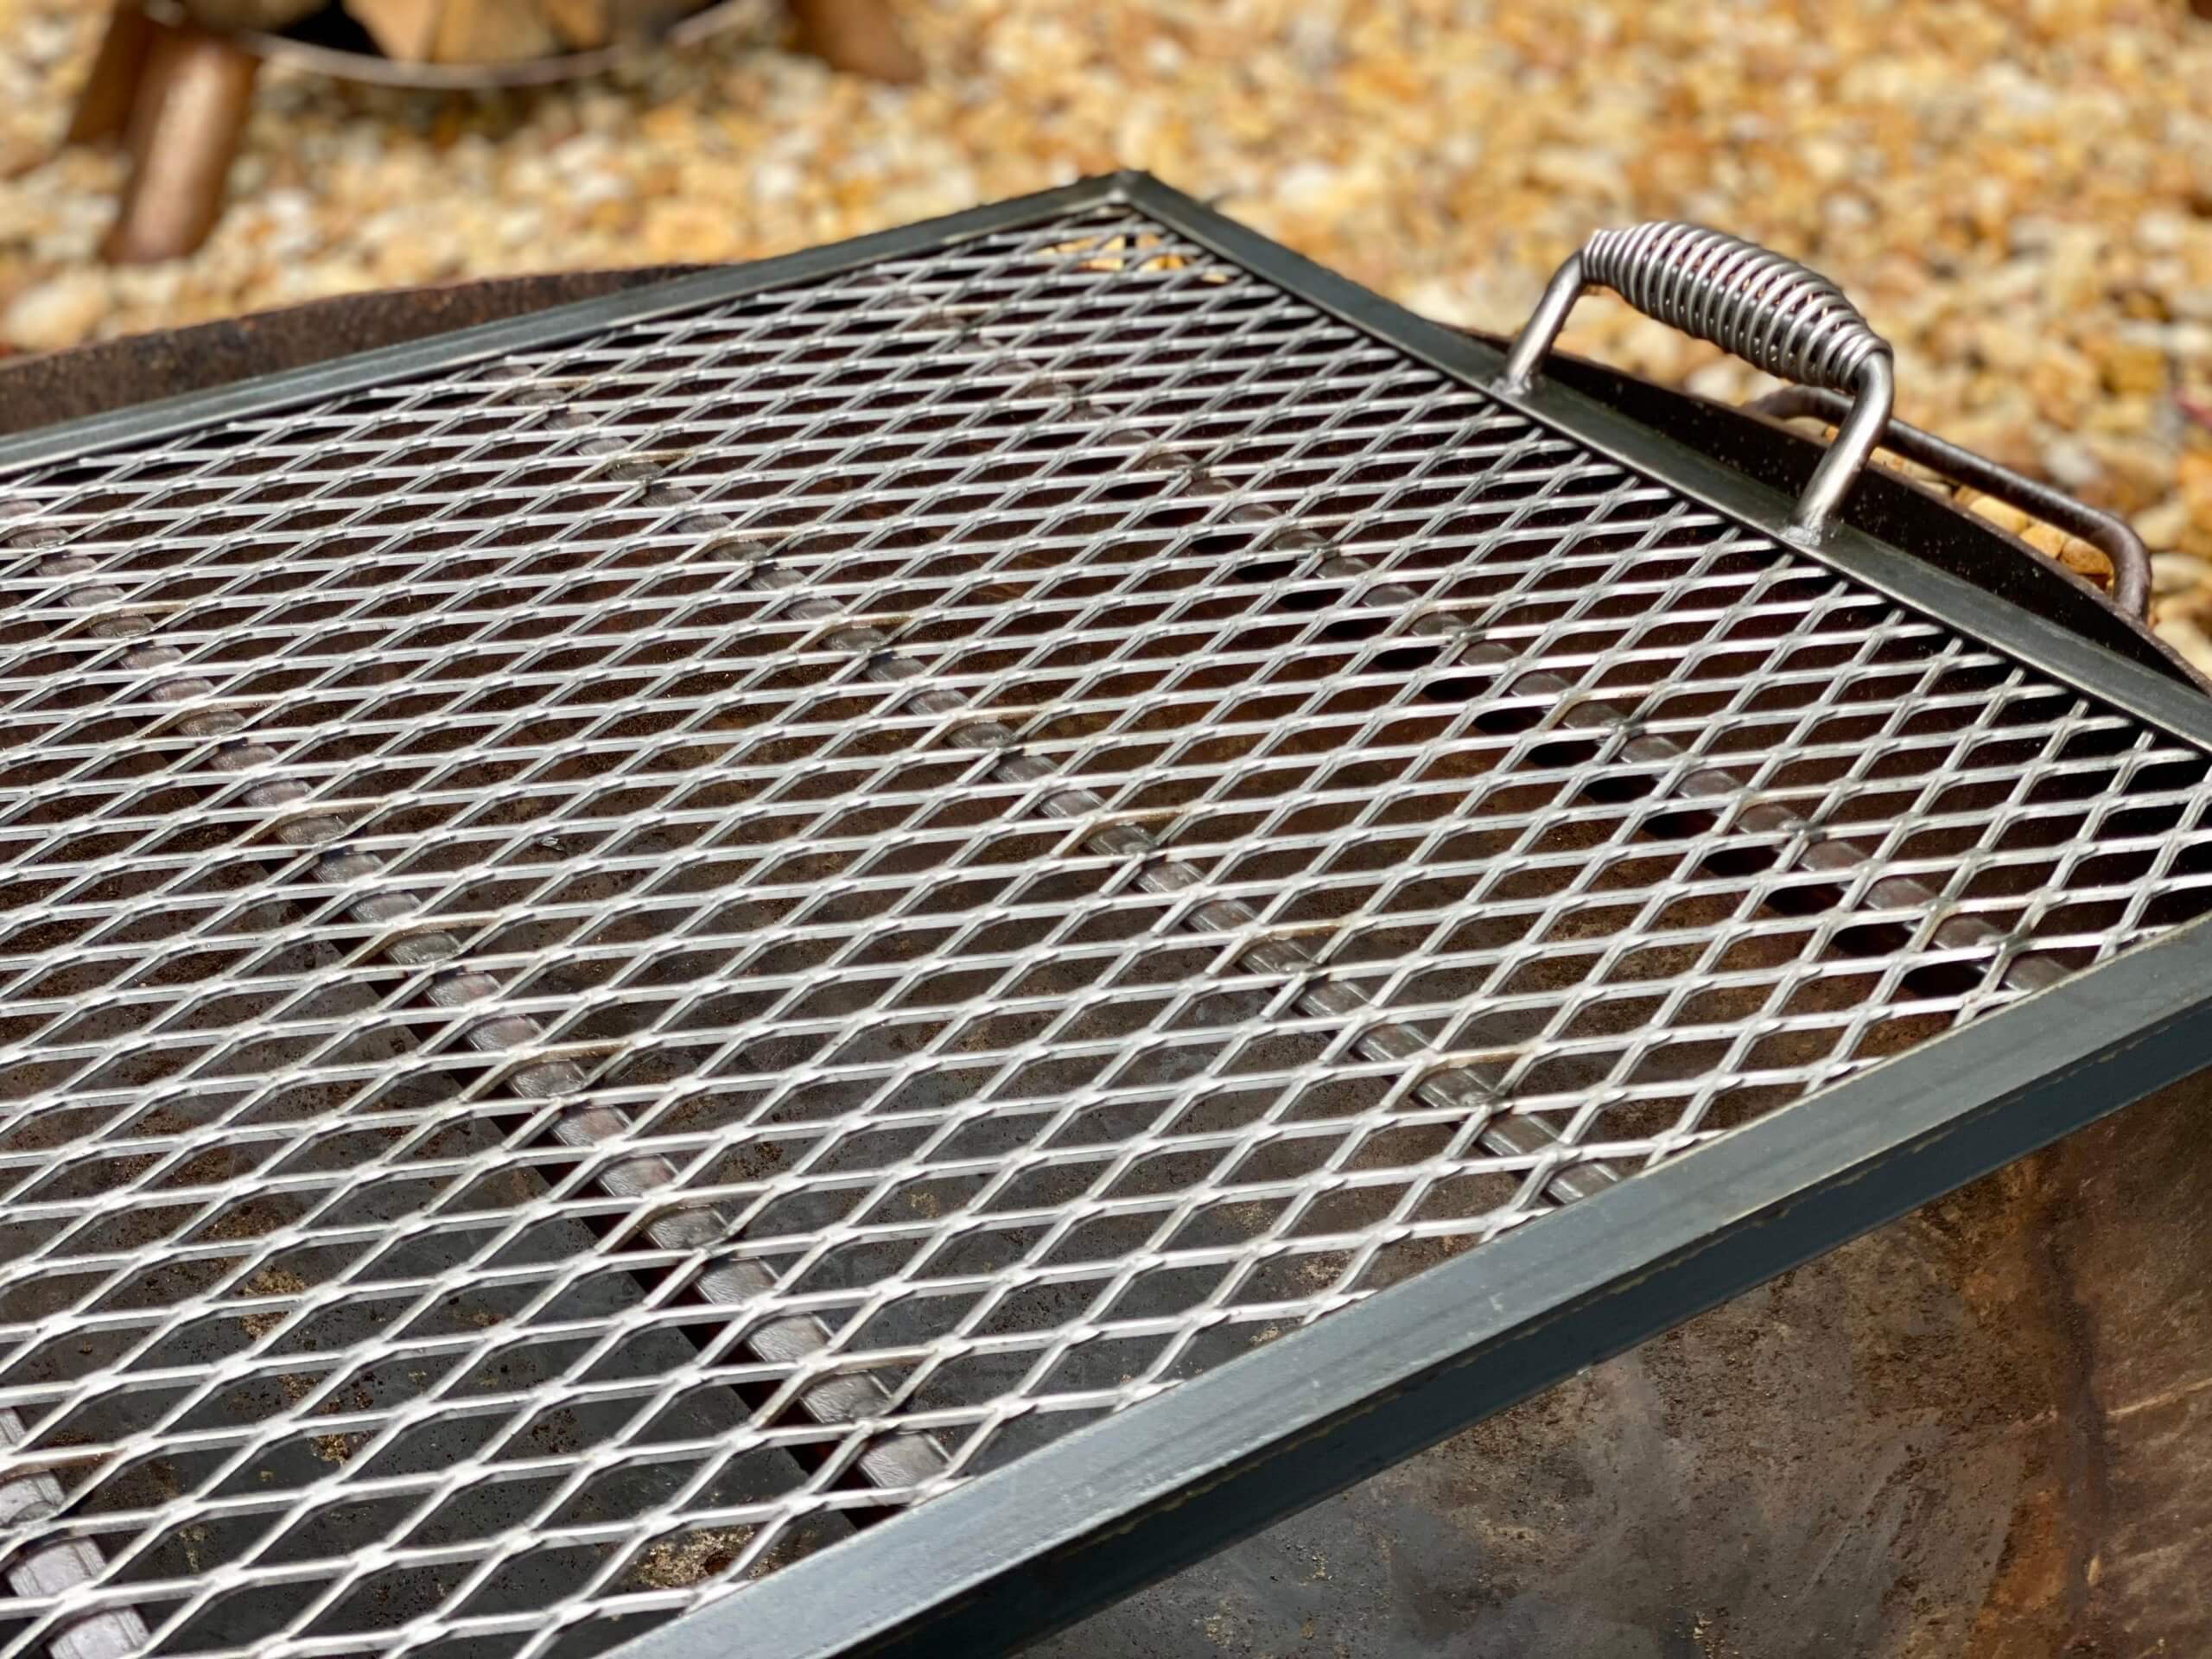 Fire Pit Cooking Grate, Fire Pit Grate Cover